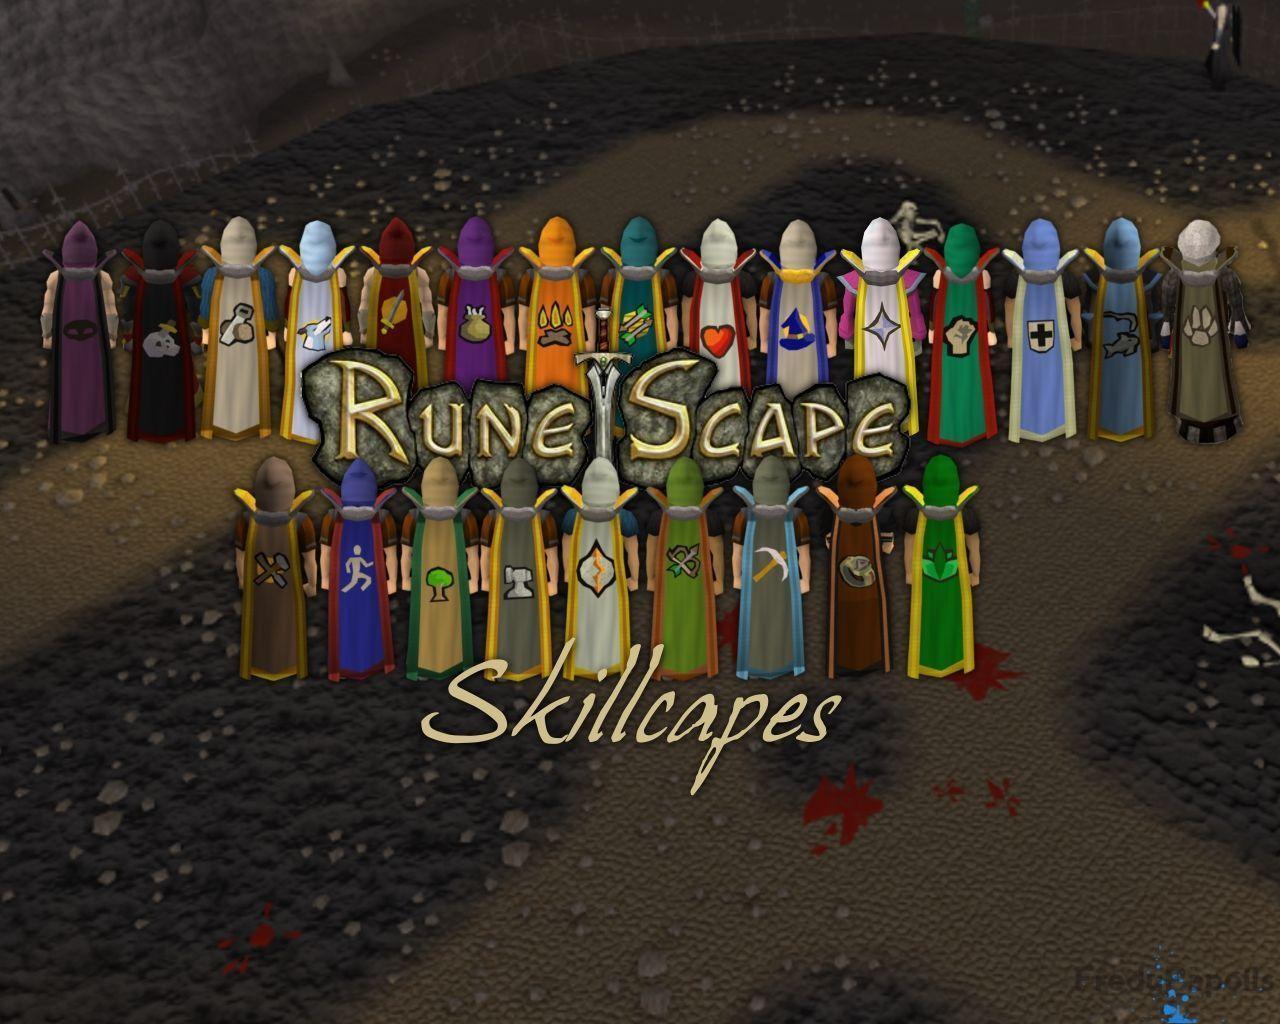 Runescape Android Wallpapers